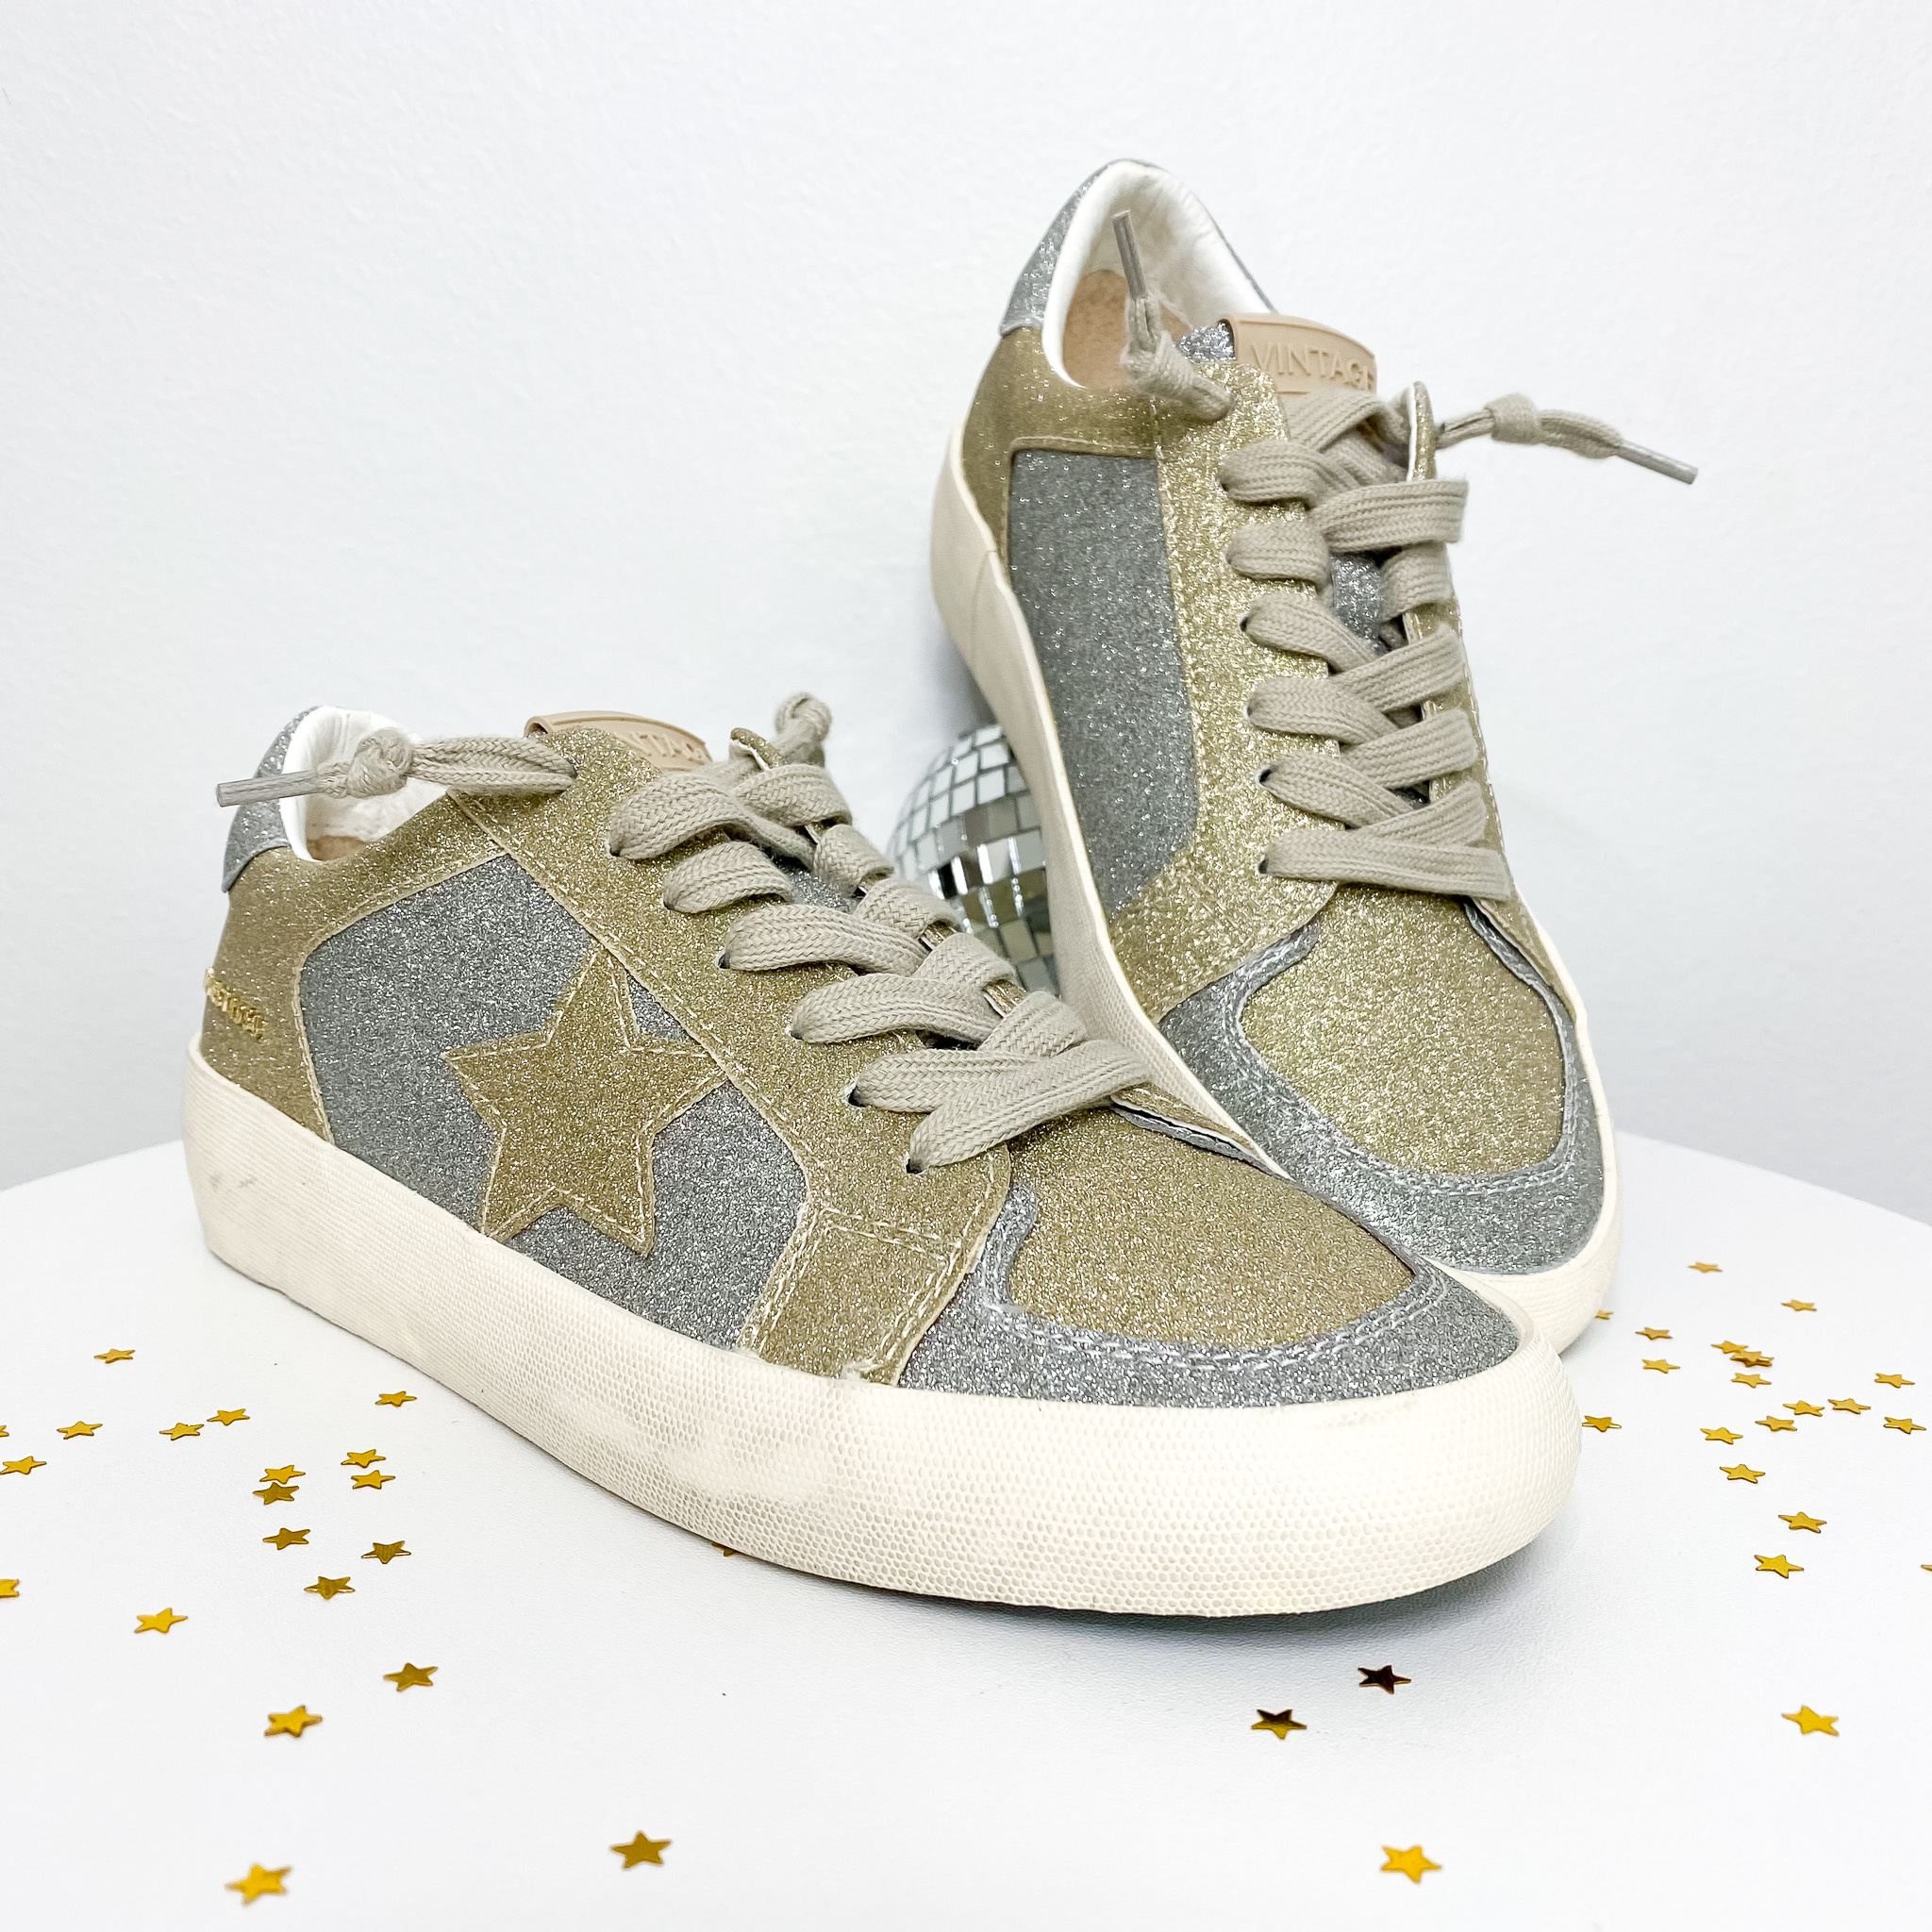 Mayo Glitter Sneakers in Gold Gold / 9